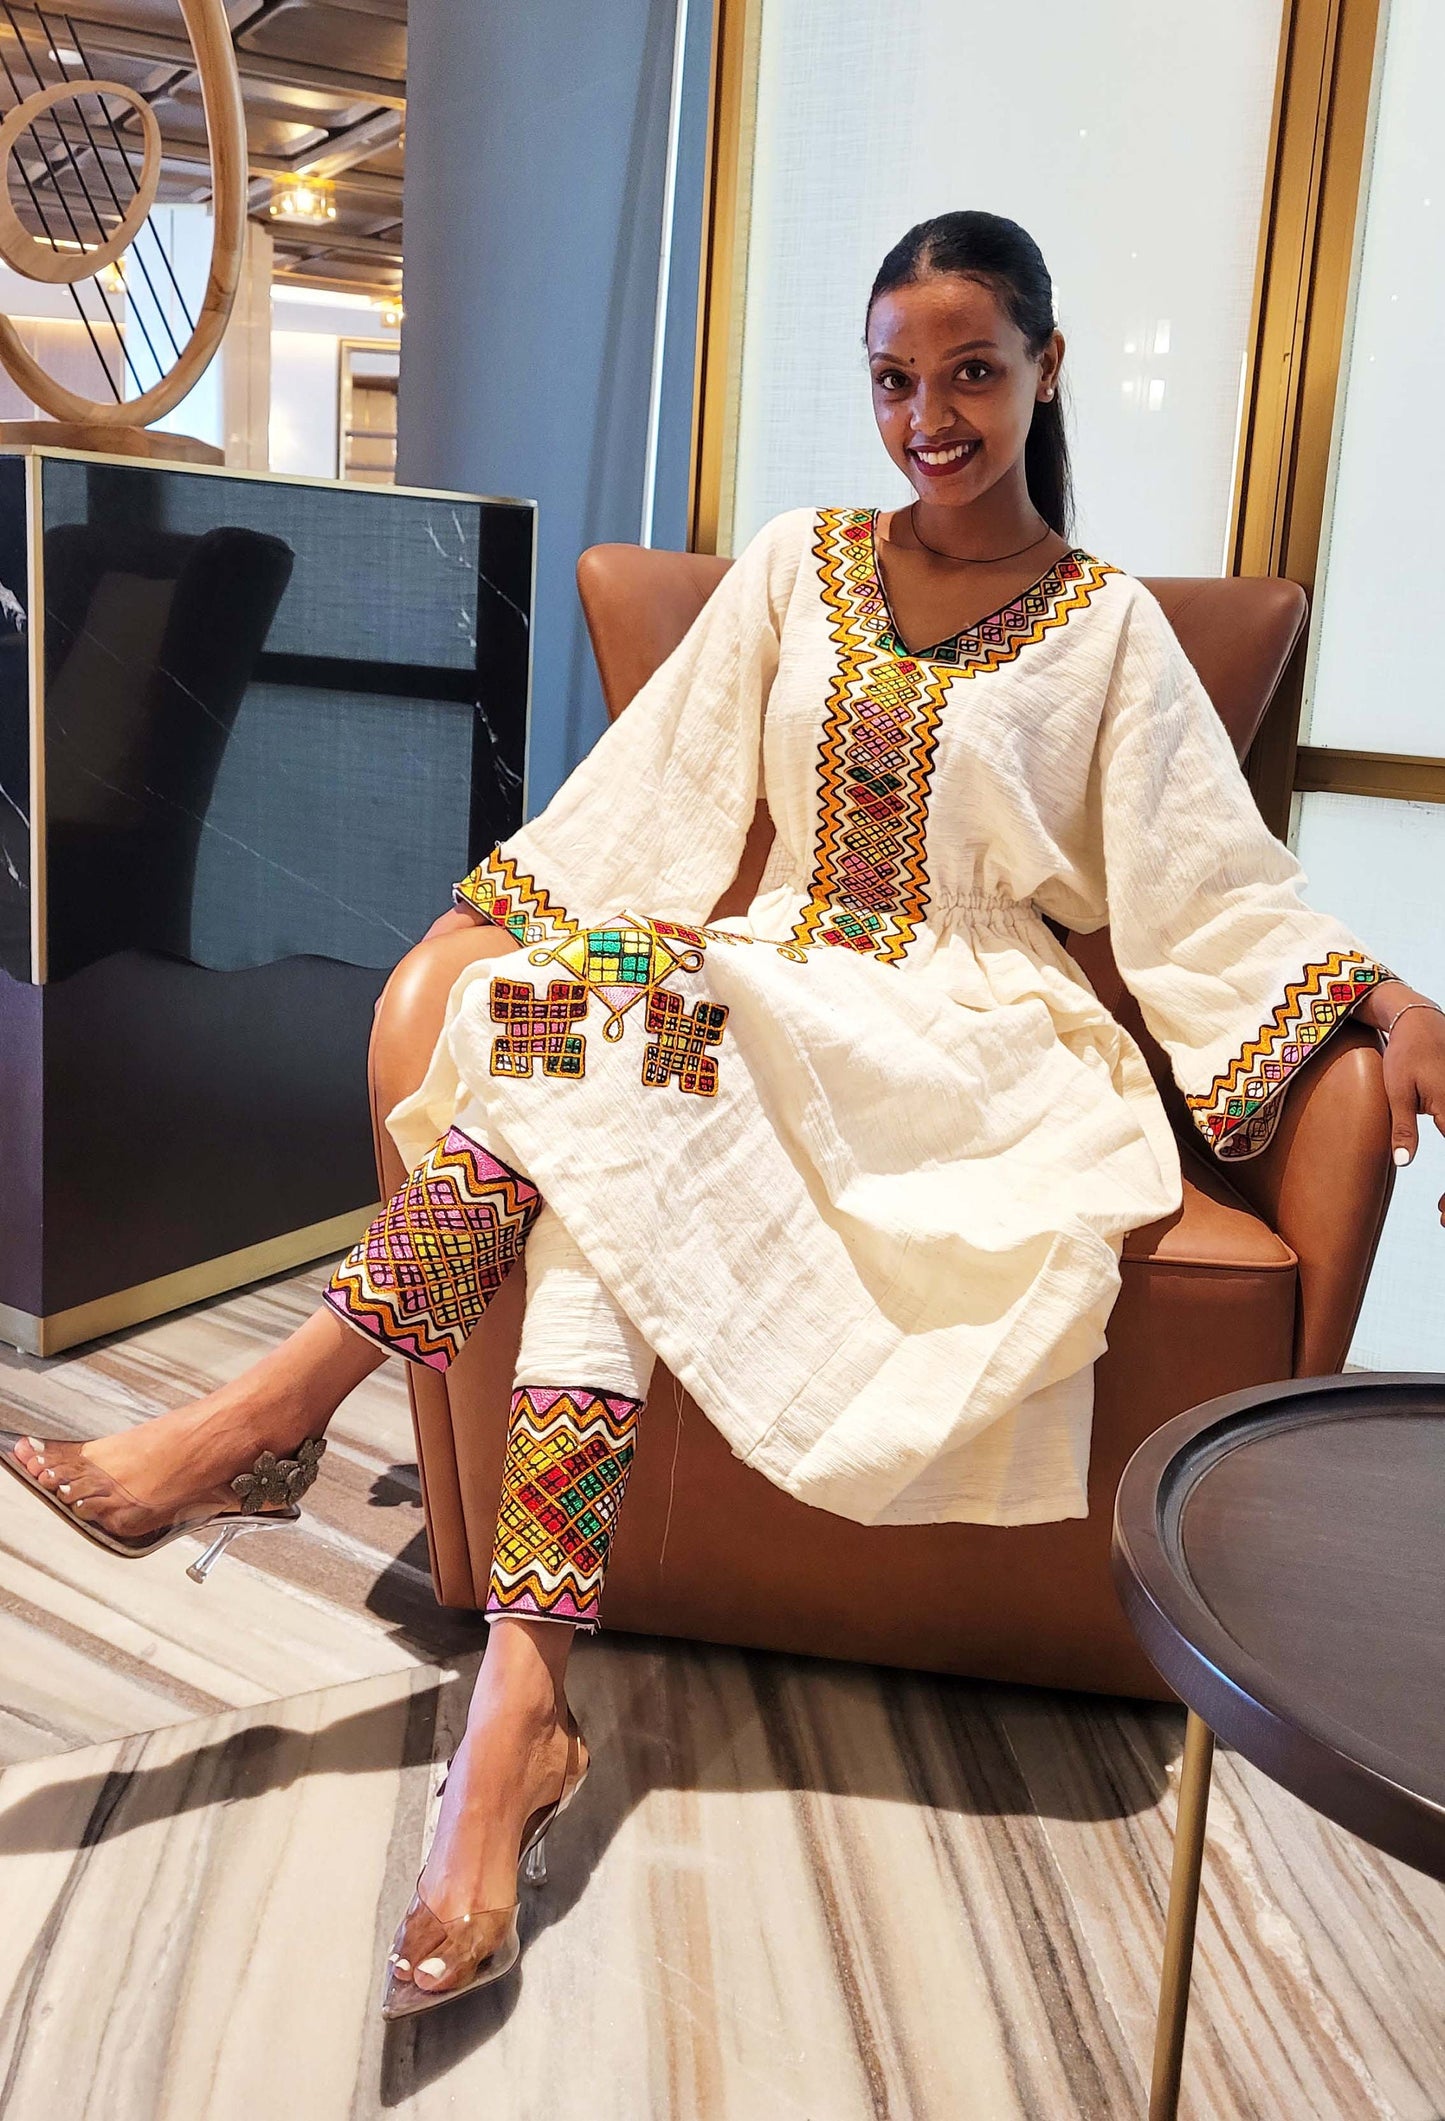 Vibrant Elegance: Pink and Orange Embroidered Habesha Dress – Celebrate Ethiopian & Eritrean Culture with this Stunning Masterpiece